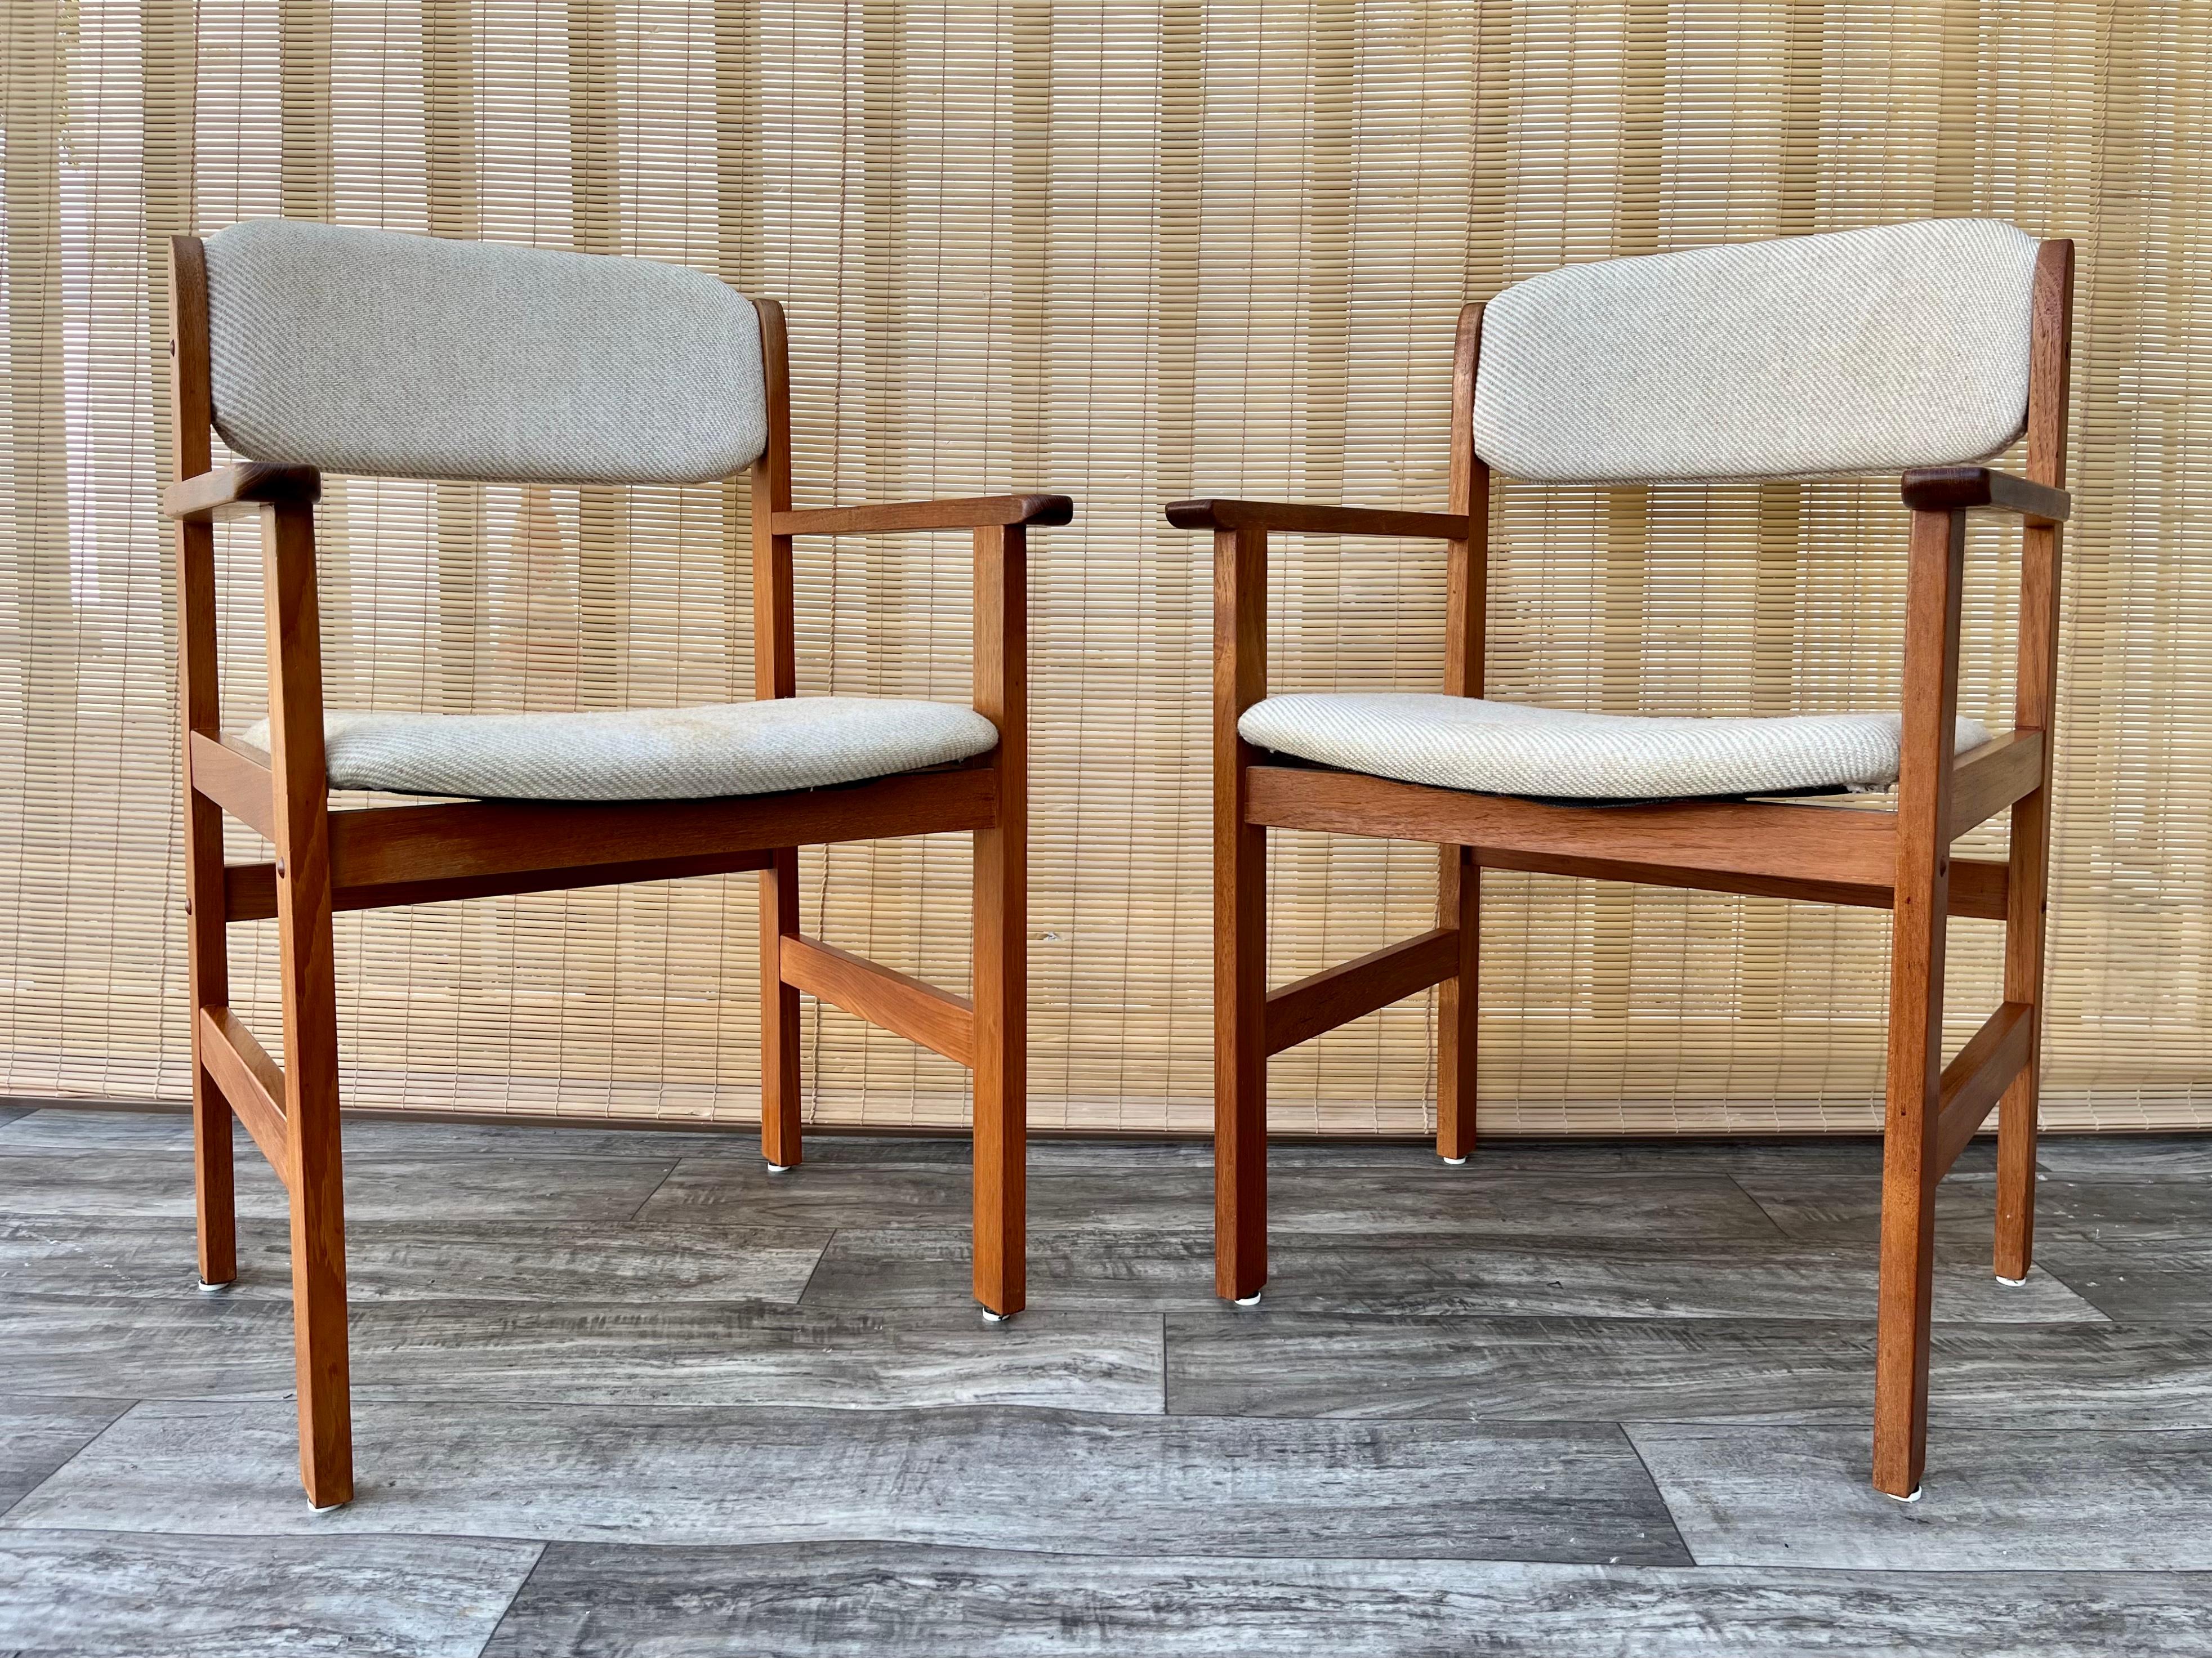 A pair of 1980s Mid-Century Danish Modern Style Captain Chairs by Benny Linden Design. 
Feature a solid teak frame in a minimalist Scandinavian Modern Design, and upholstered seats and back rests with the original cream color fabric. 
The teak